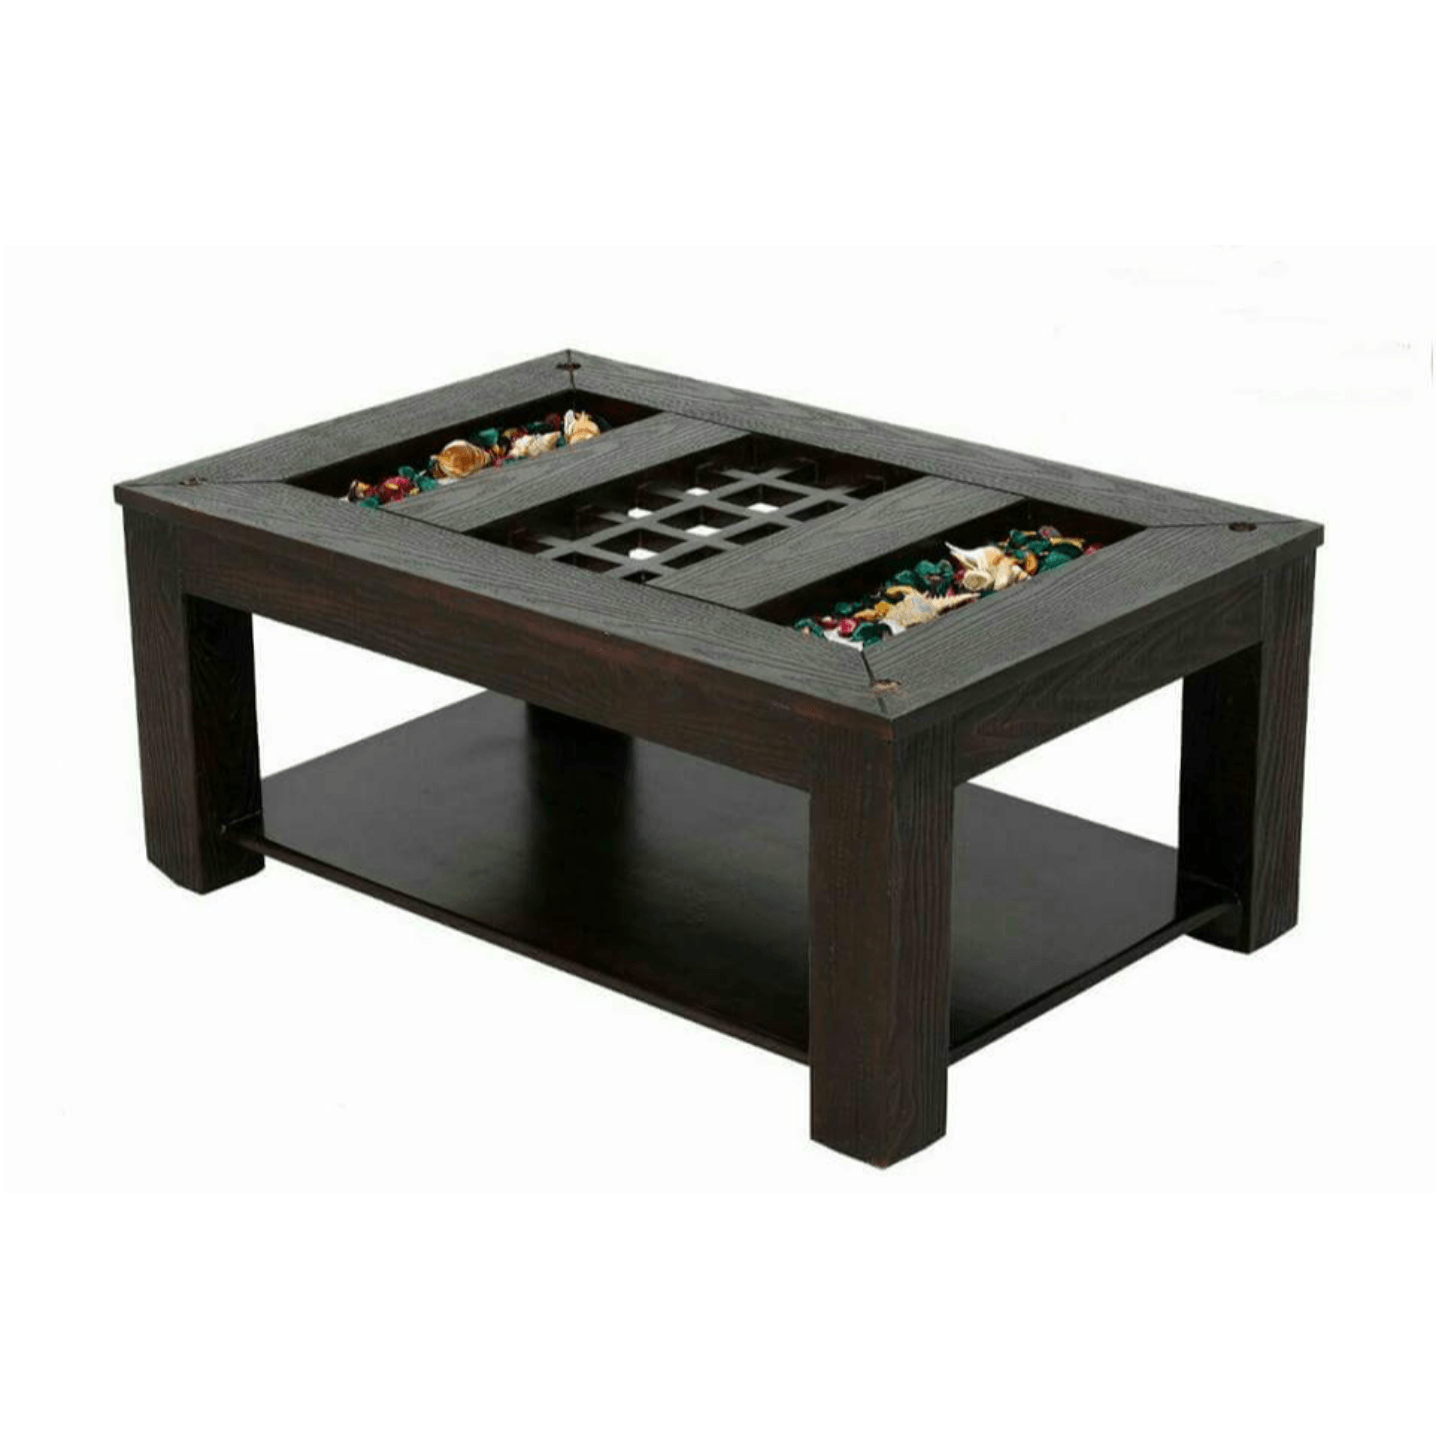 DW Center Table C-011 2 Box In Brown Colour